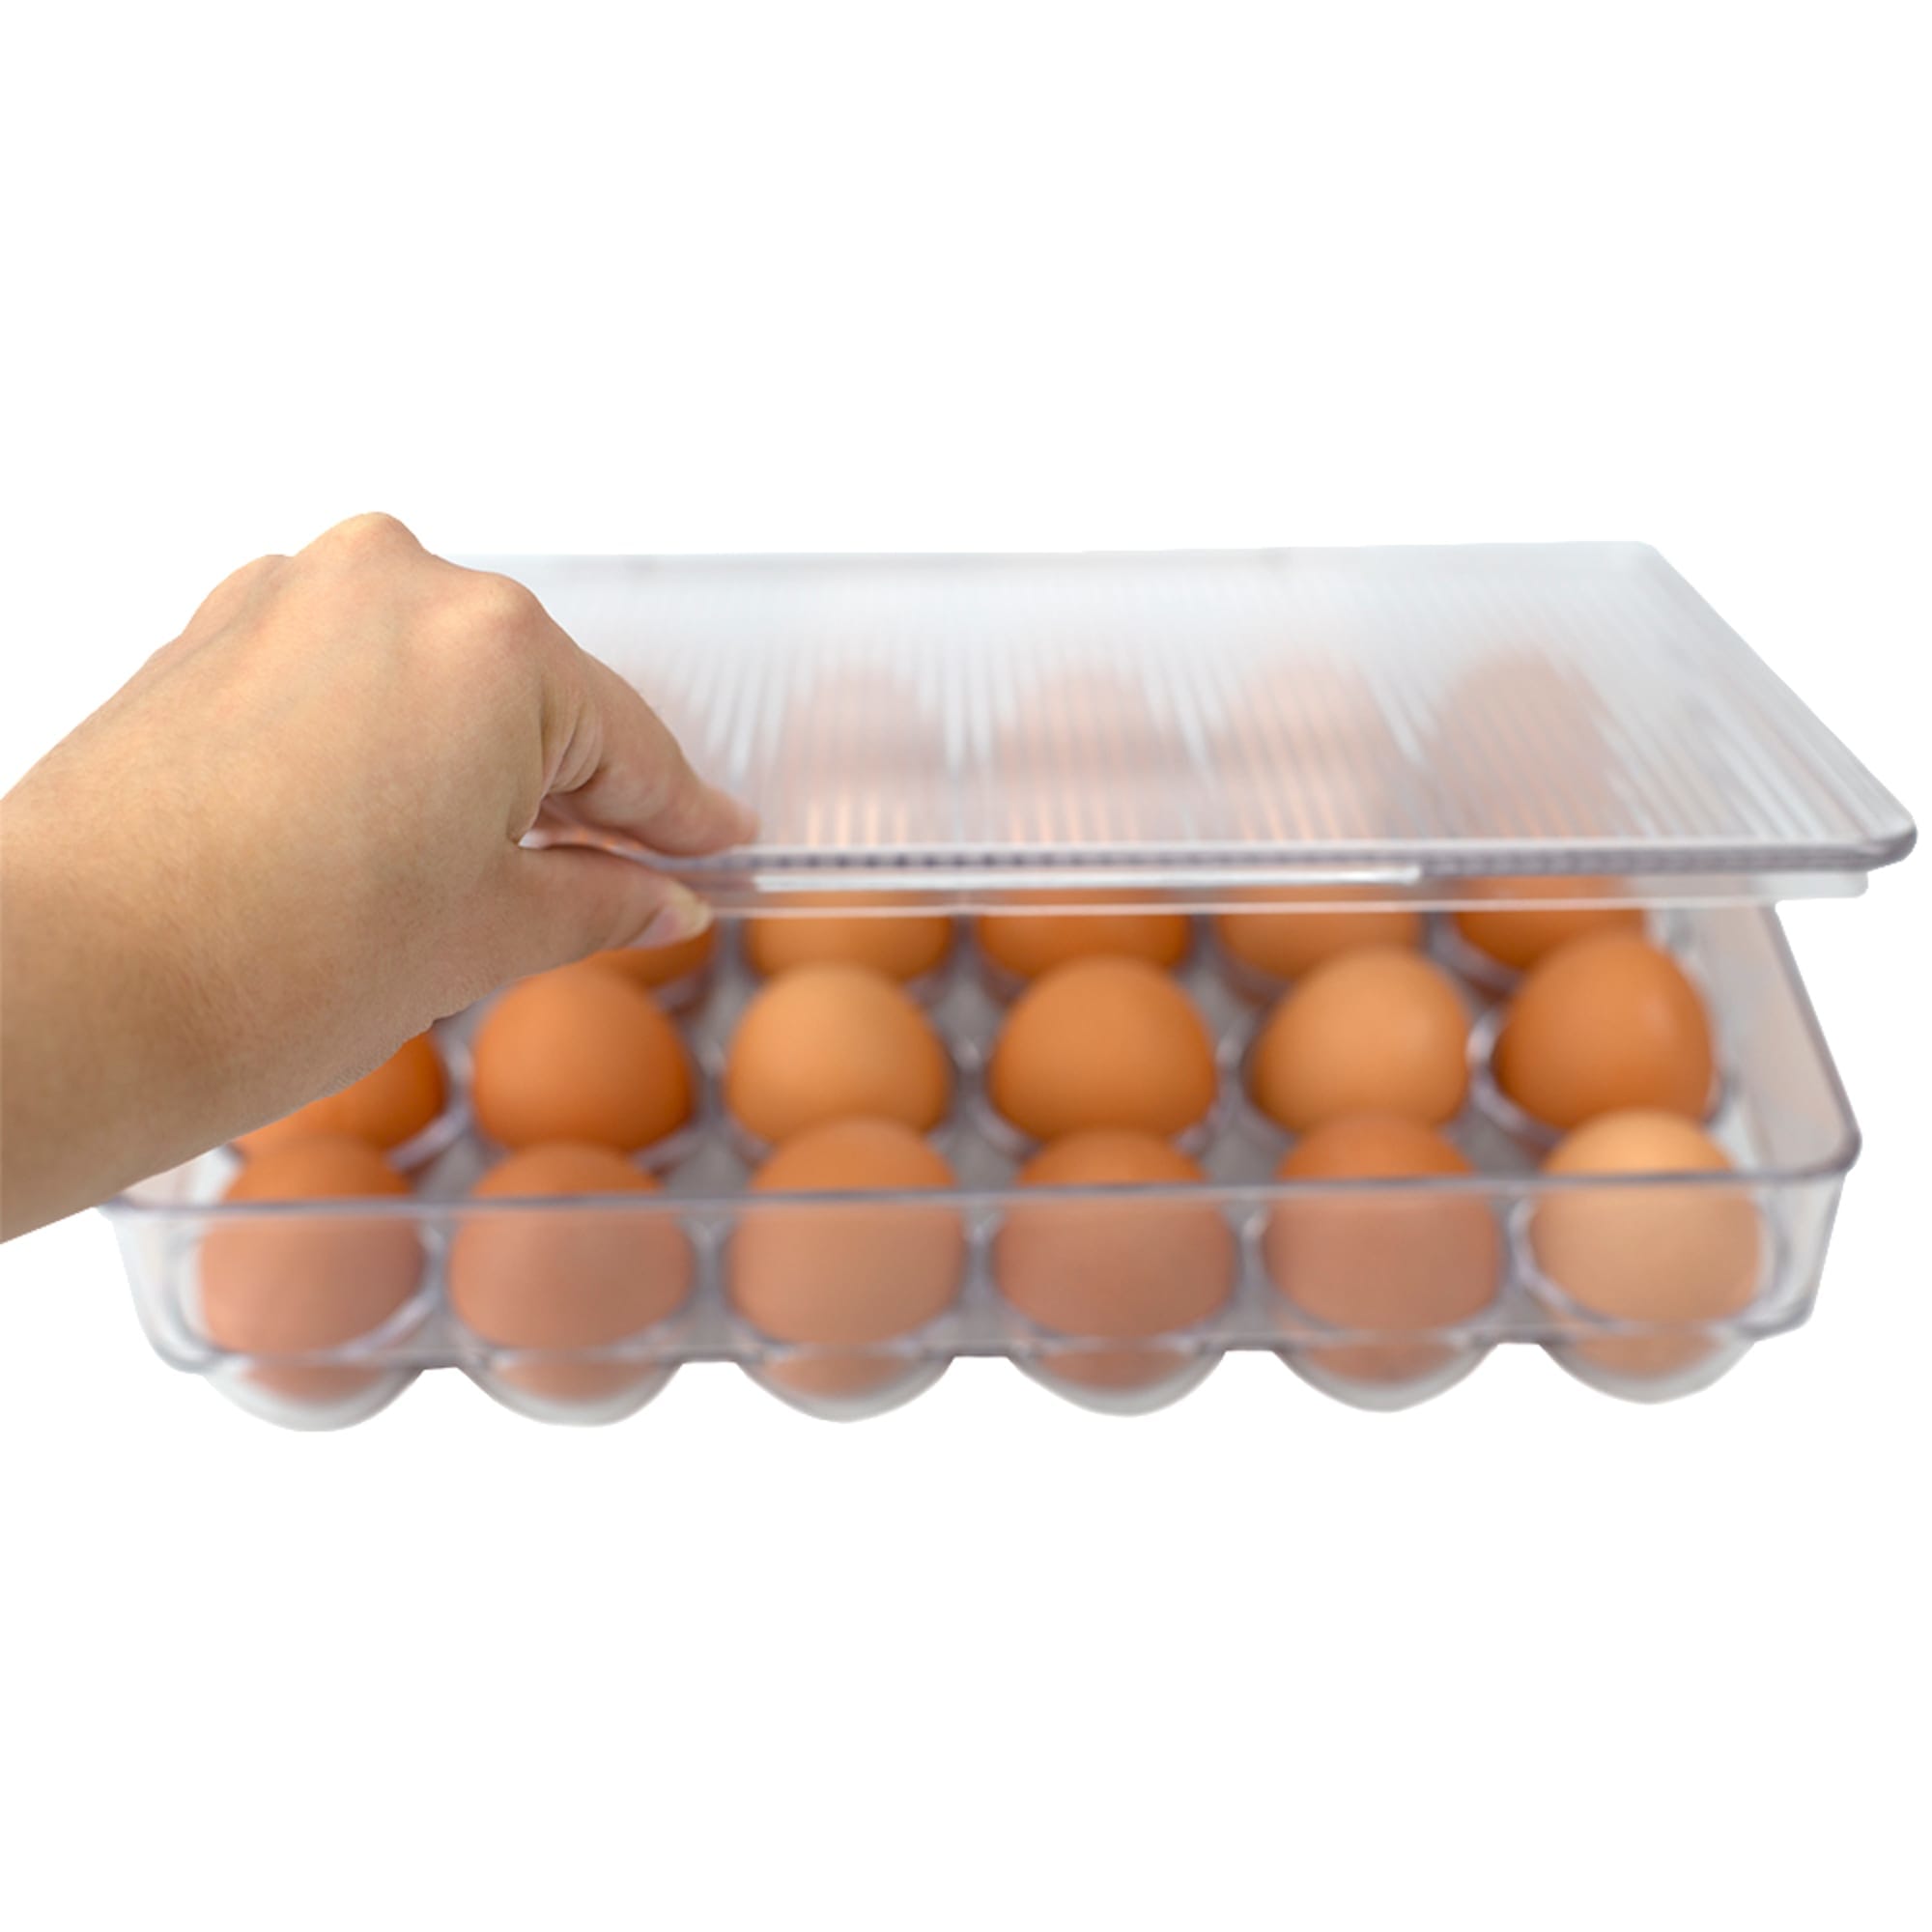 Michael Graves Design Stackable 24 Compartment Plastic Egg Container with Lid, Clear $8.00 EACH, CASE PACK OF 12